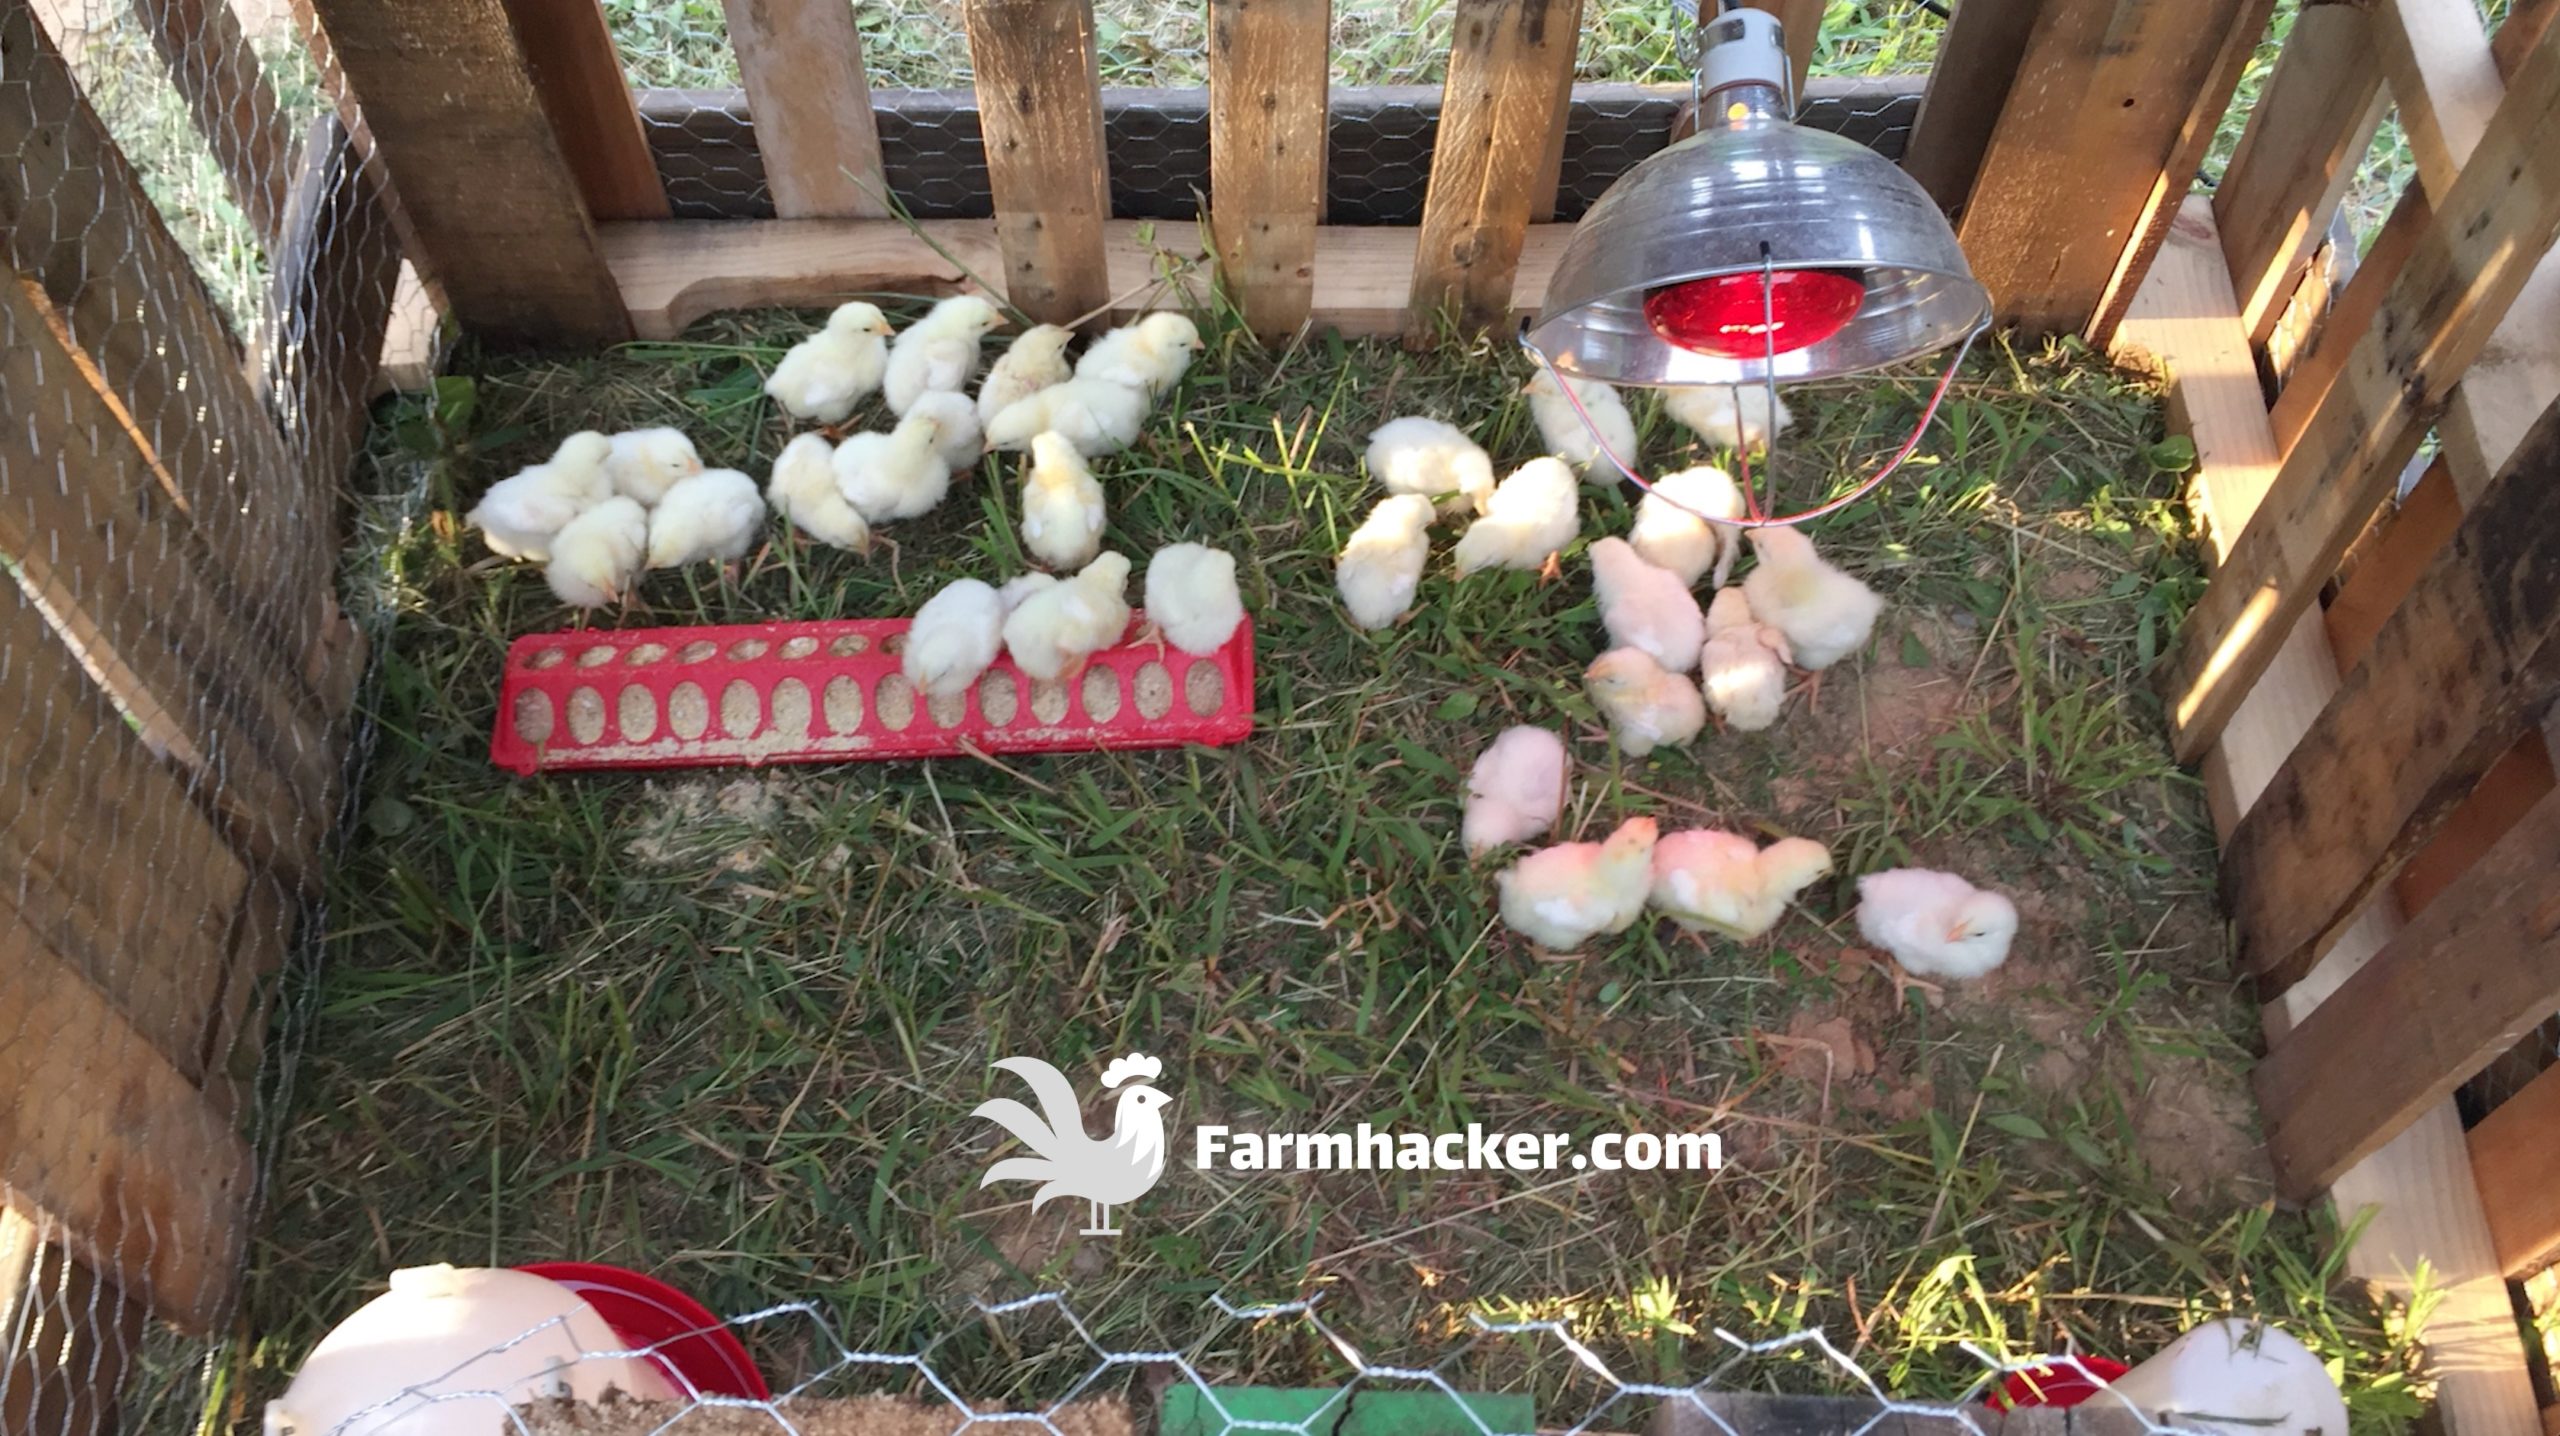 How to Build a Chicken Brooder out of Pallets - The Inside